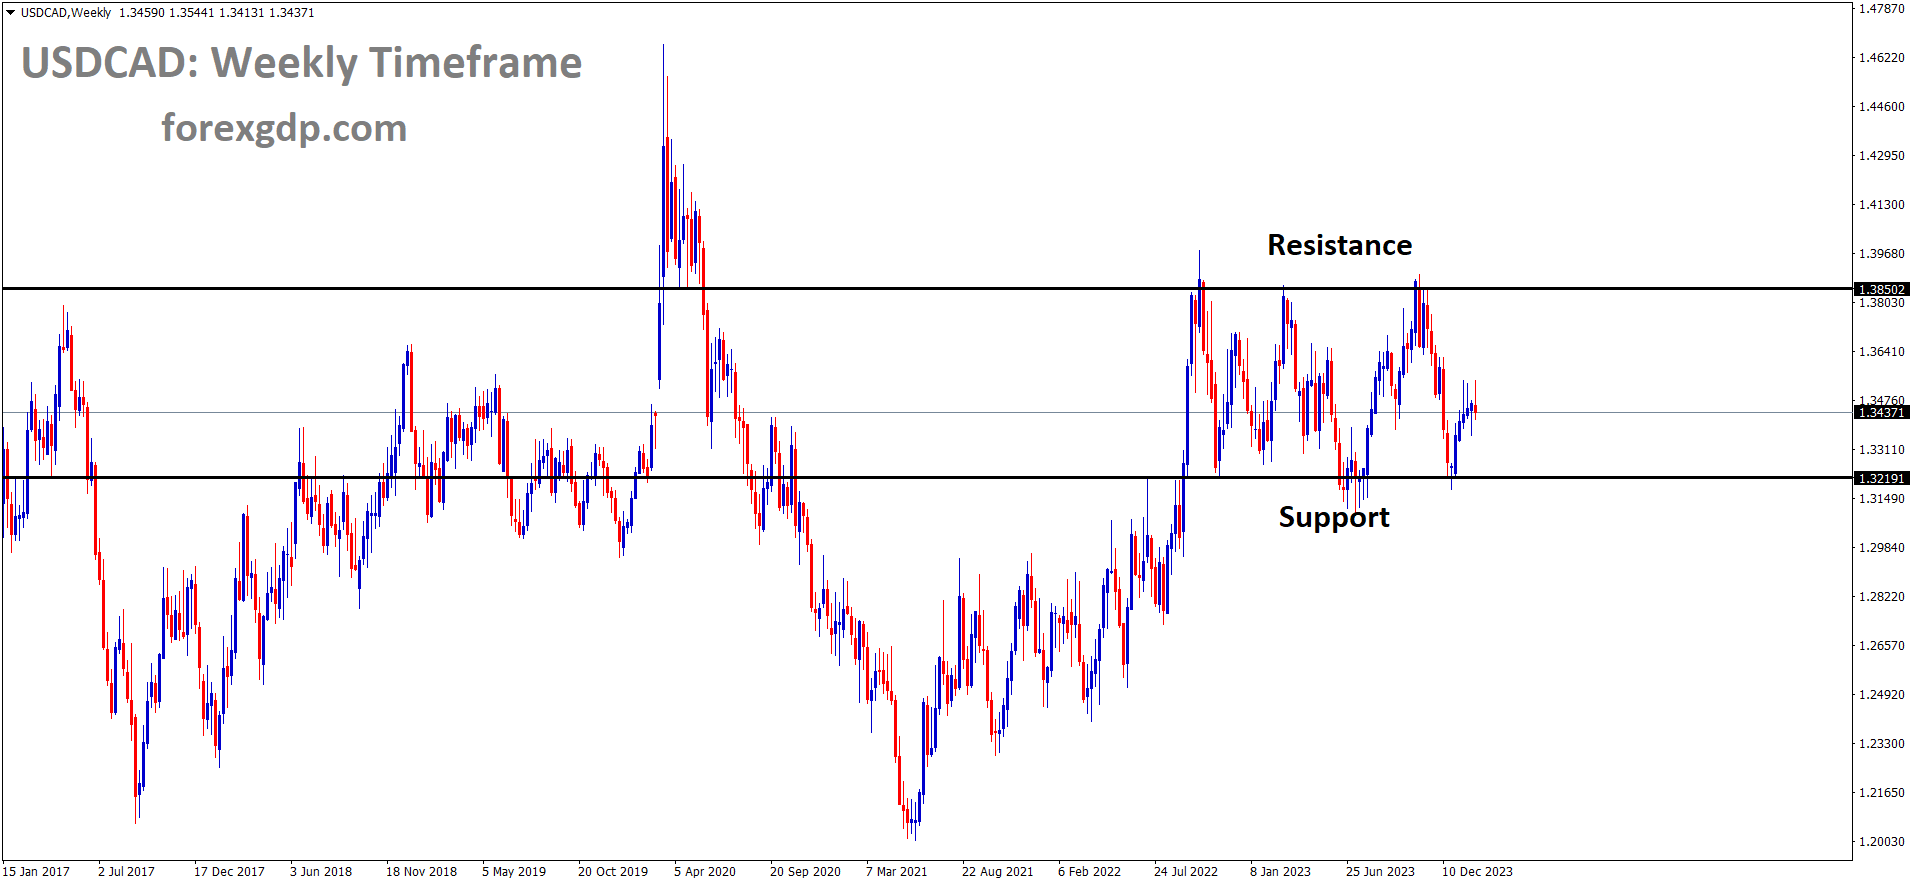 USDCAD is moving in box pattern and market has rebounded from the support area of the pattern